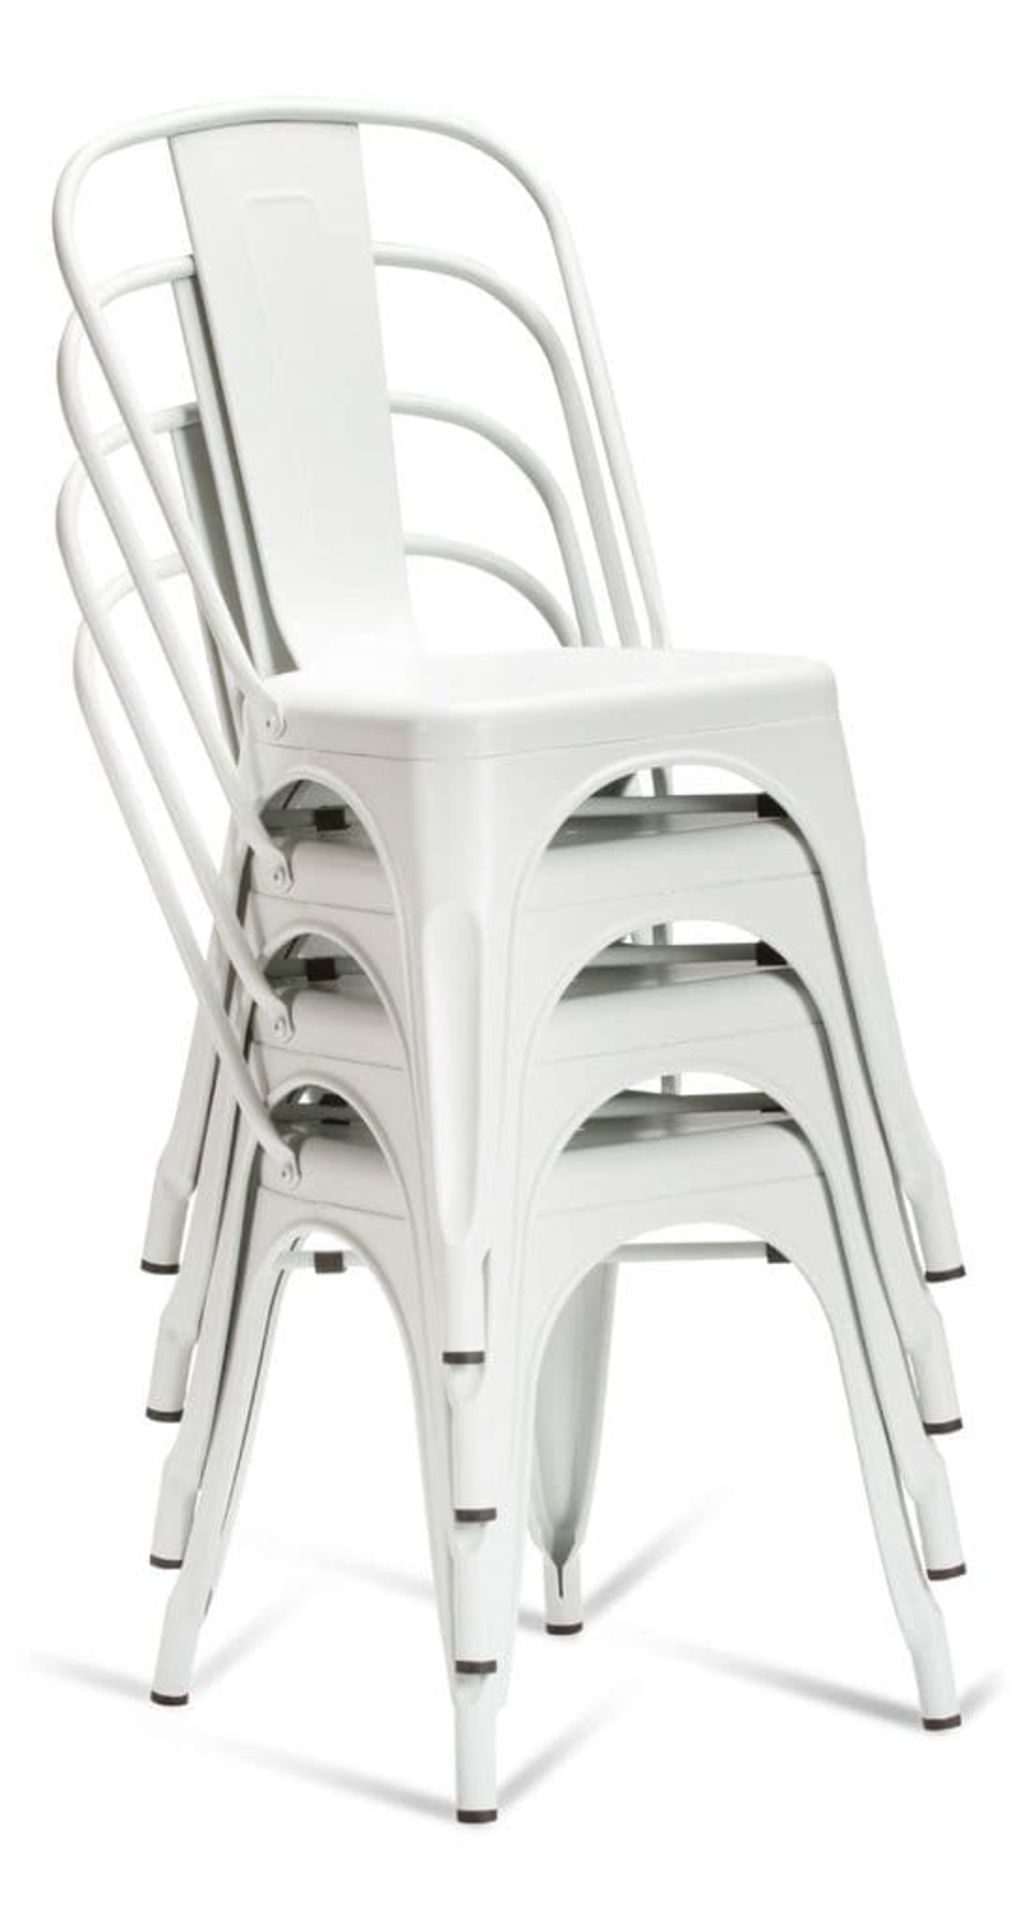 1 x Tolix Industrial Style Outdoor Bistro Table and Chair Set in White- Includes 1 x Table and 4 x - Image 9 of 13